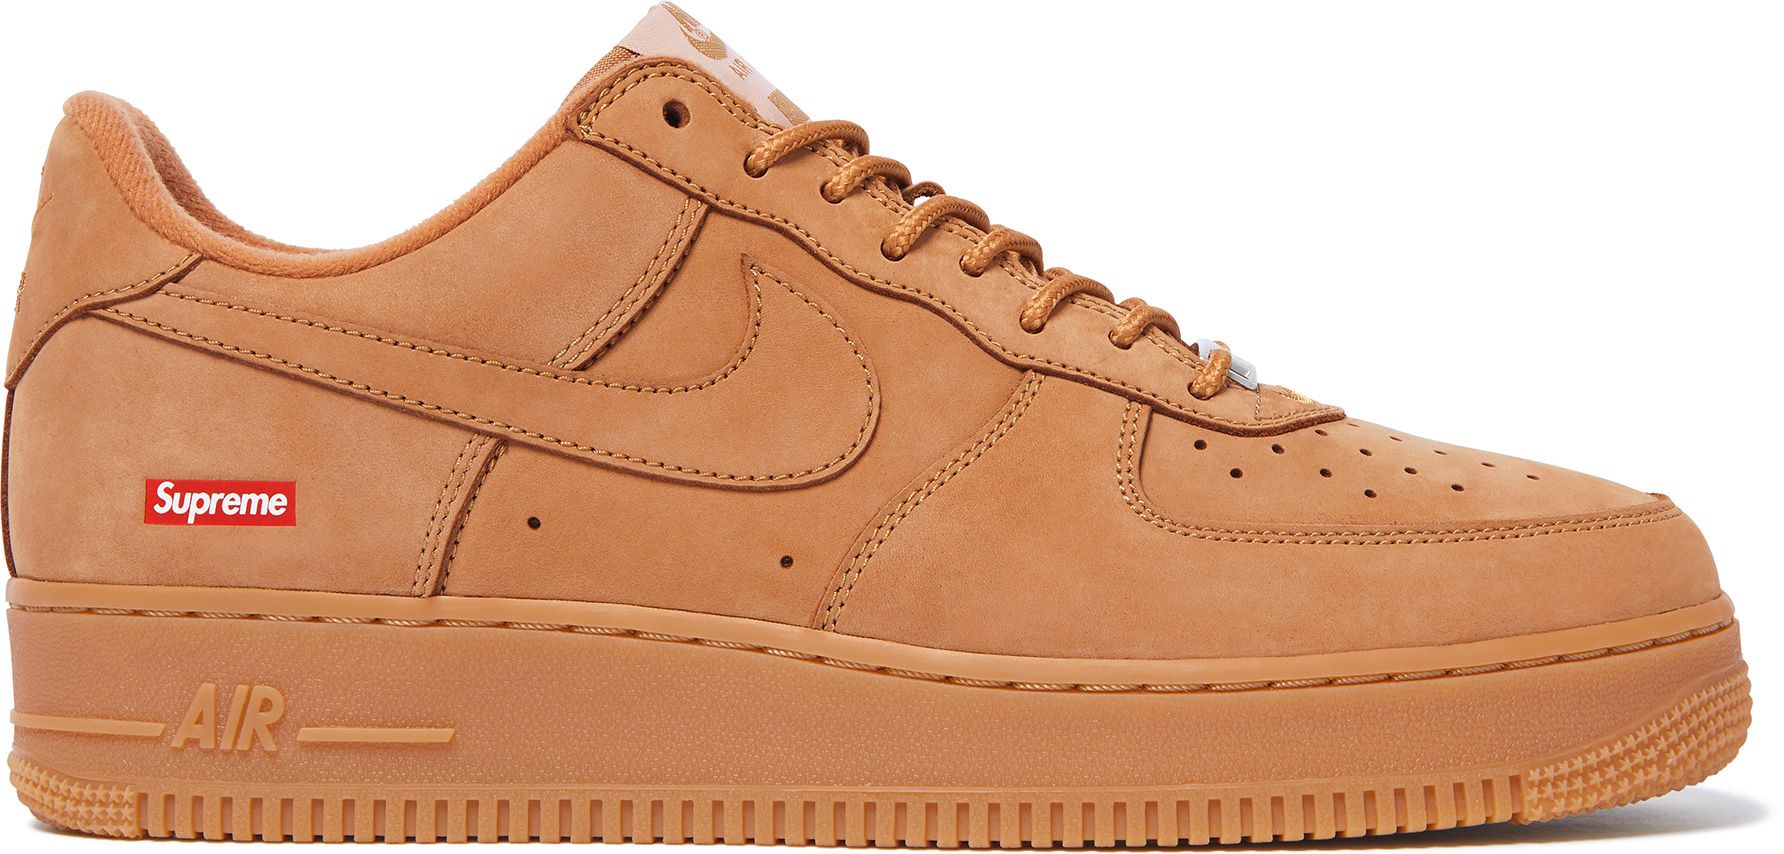 Supreme®/Nike® Air Force 1 Low - Fall/Winter 2021 Preview – Supreme